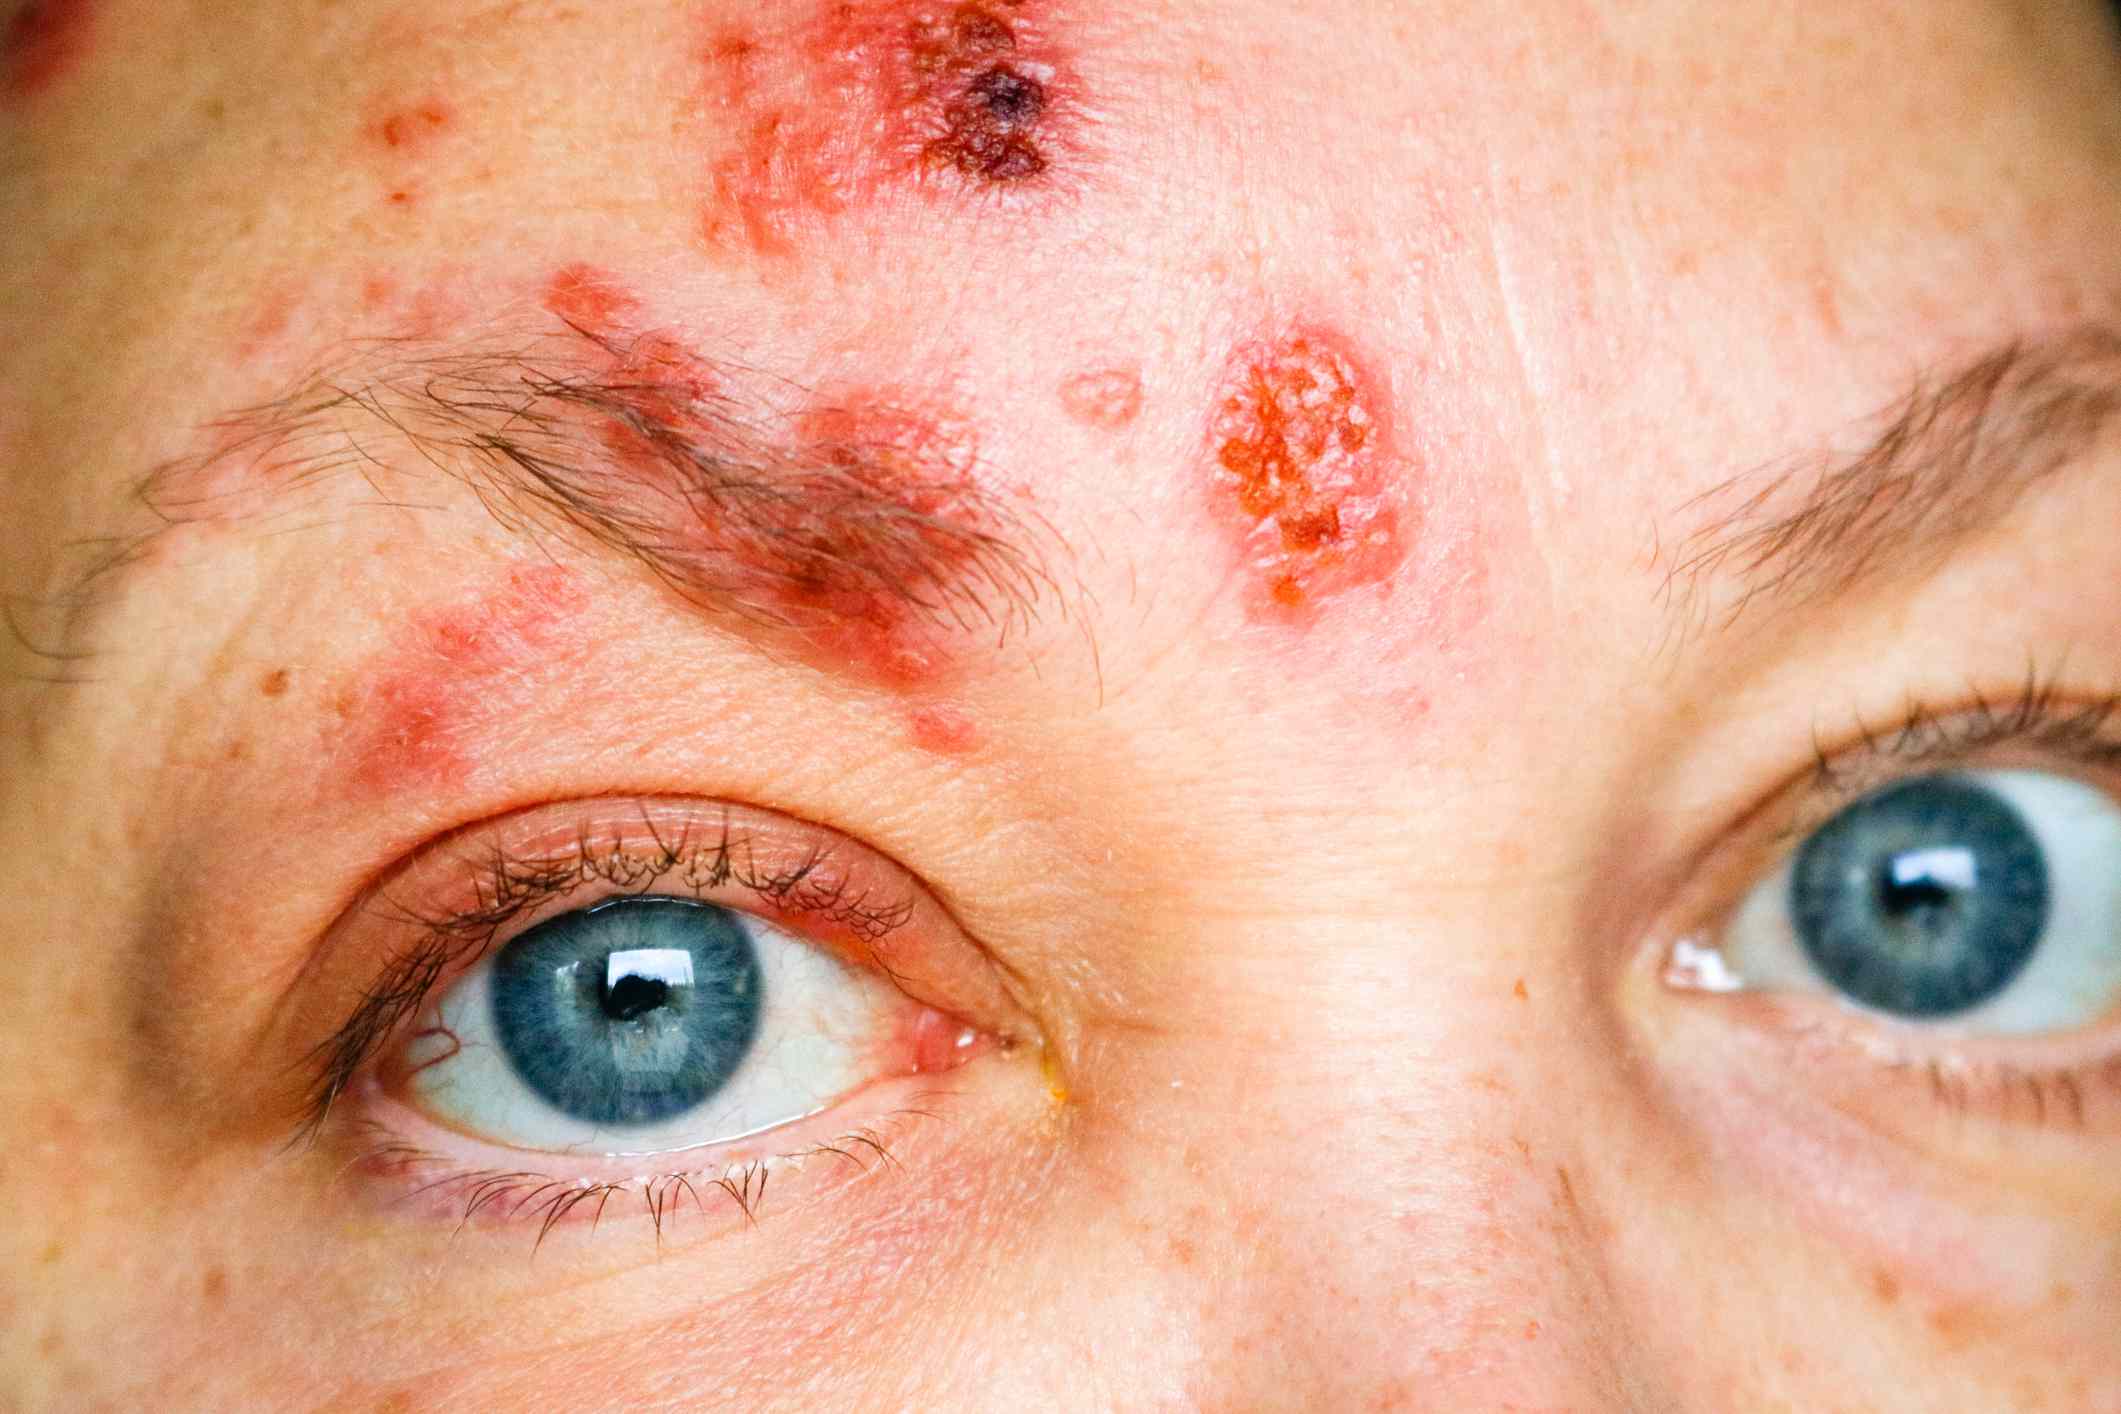 What Does Shingles Look Like: Shingles Rash Pictures